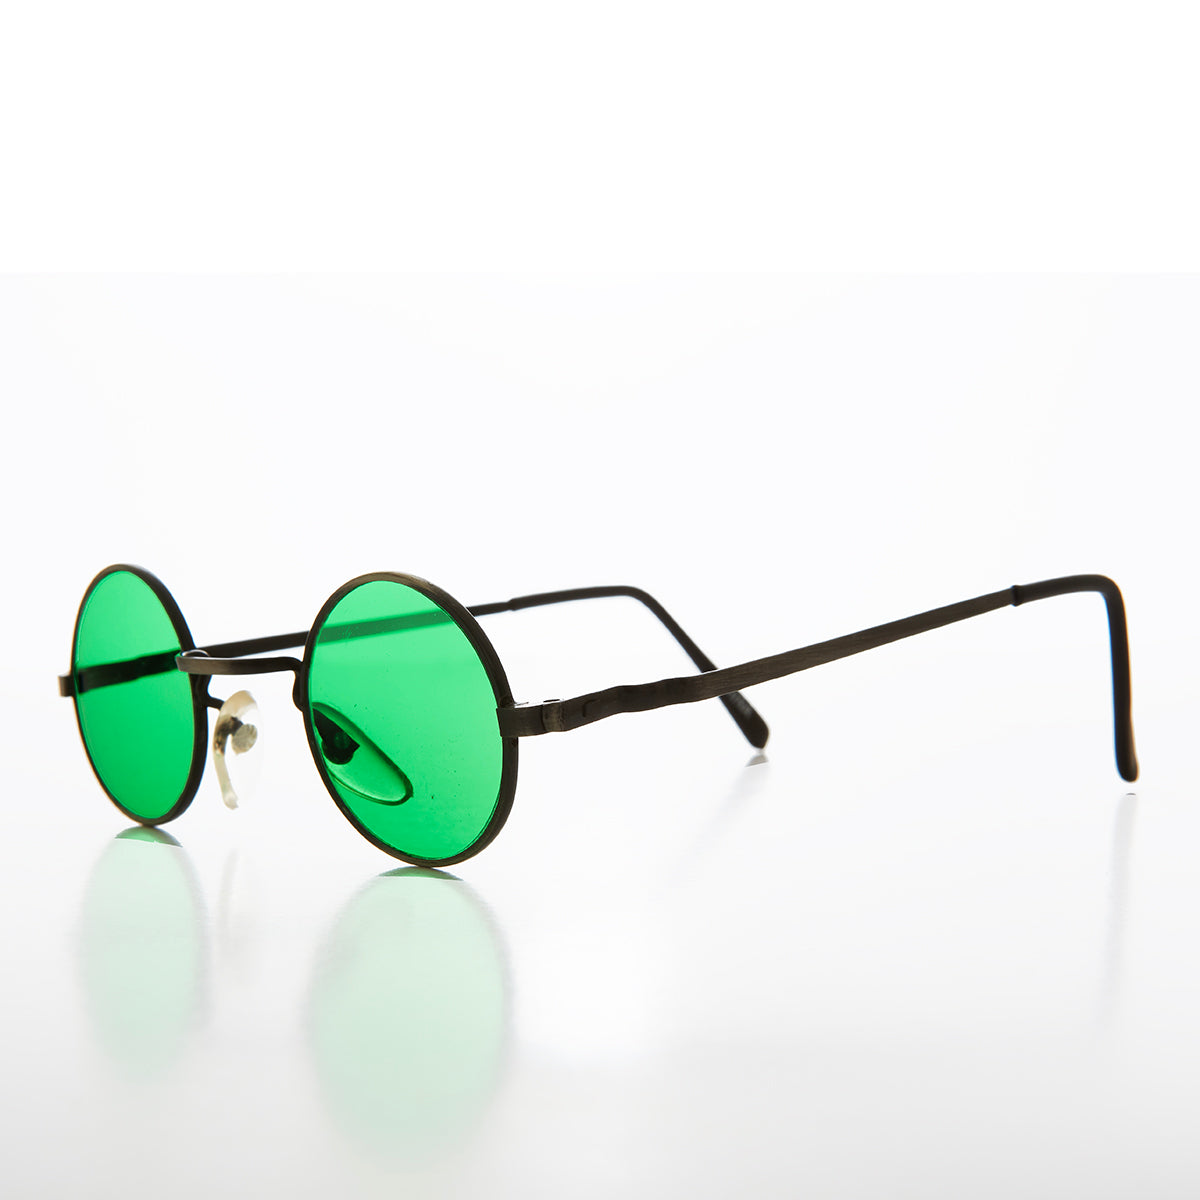 Small Round Tinted Lens Hippy Vintage Sunglasses